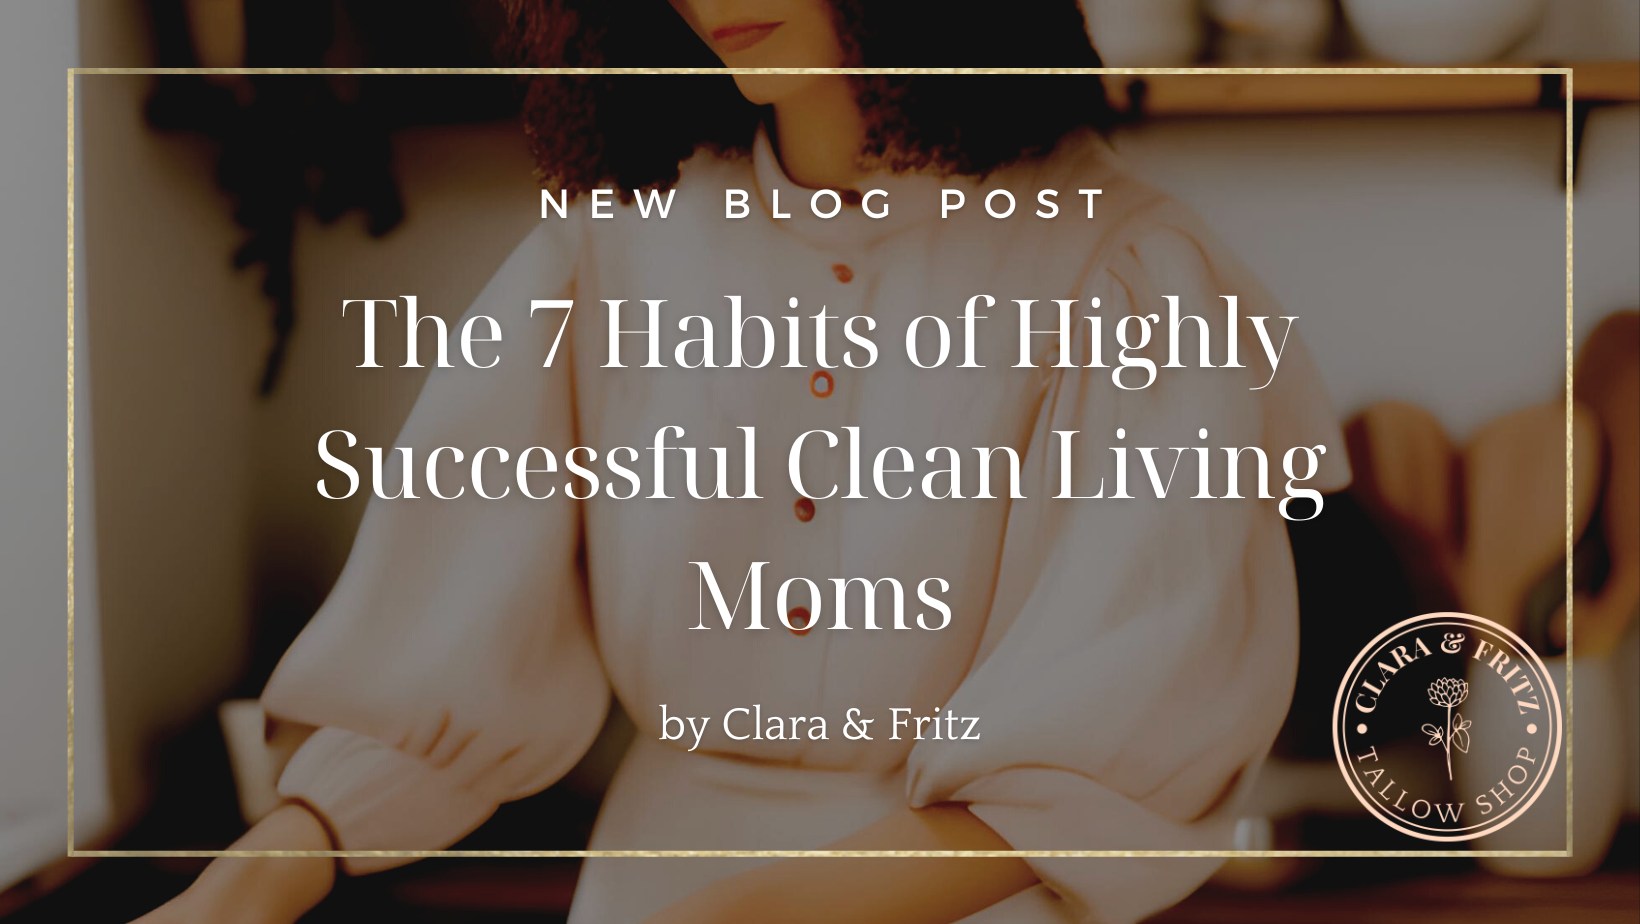 The 7 Habits of Highly Successful Clean Living Moms